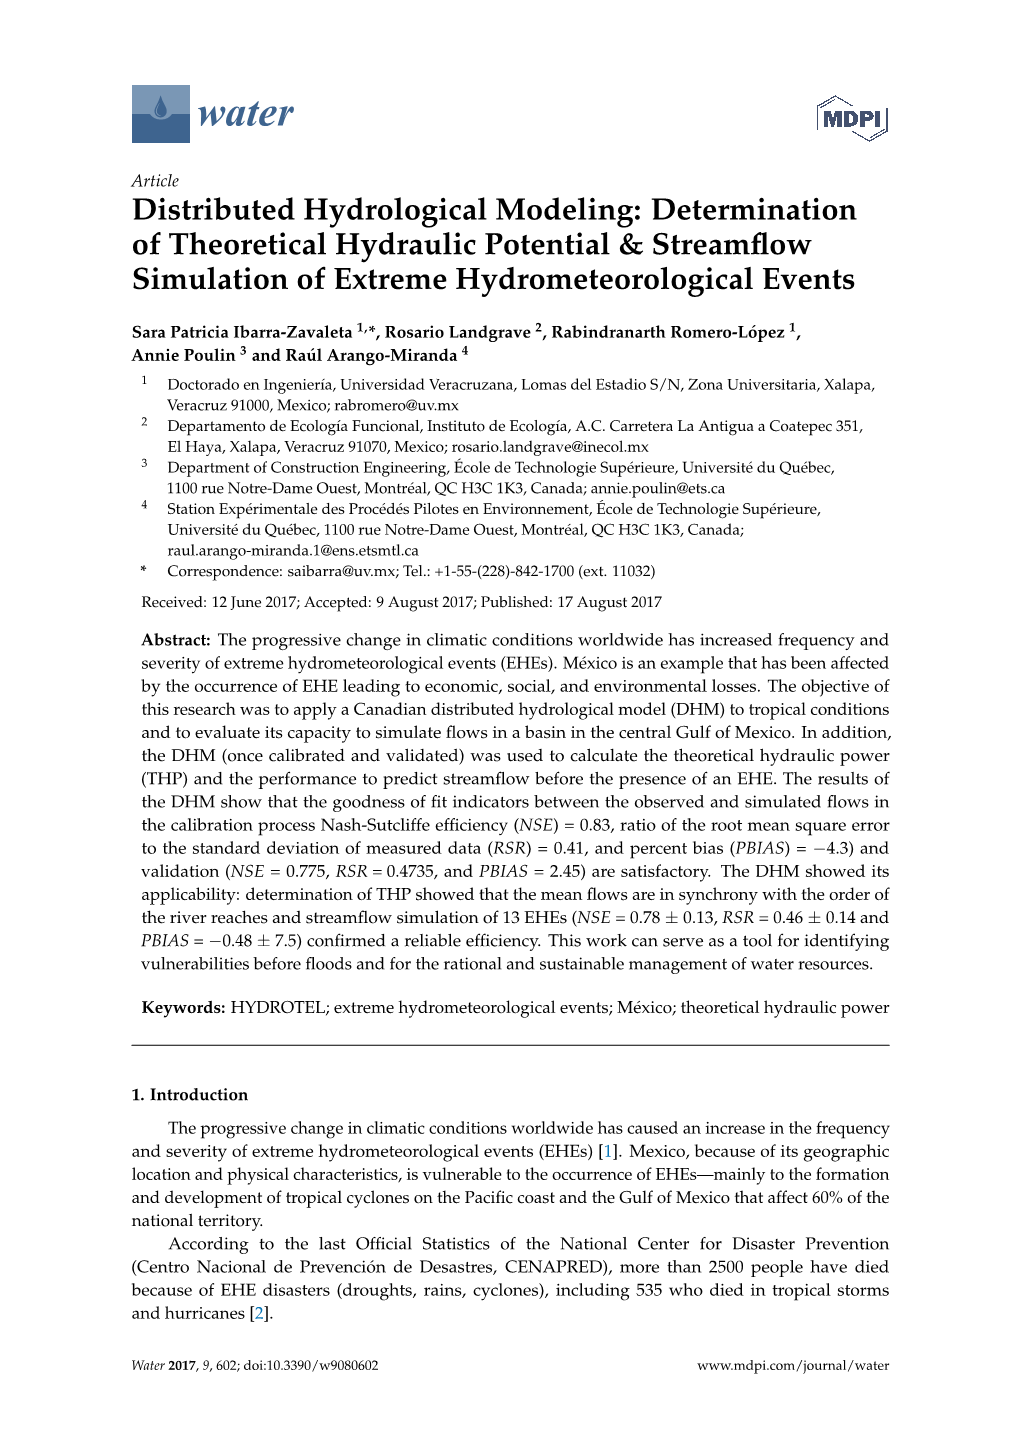 Distributed Hydrological Modeling: Determination of Theoretical Hydraulic Potential & Streamﬂow Simulation of Extreme Hydrometeorological Events